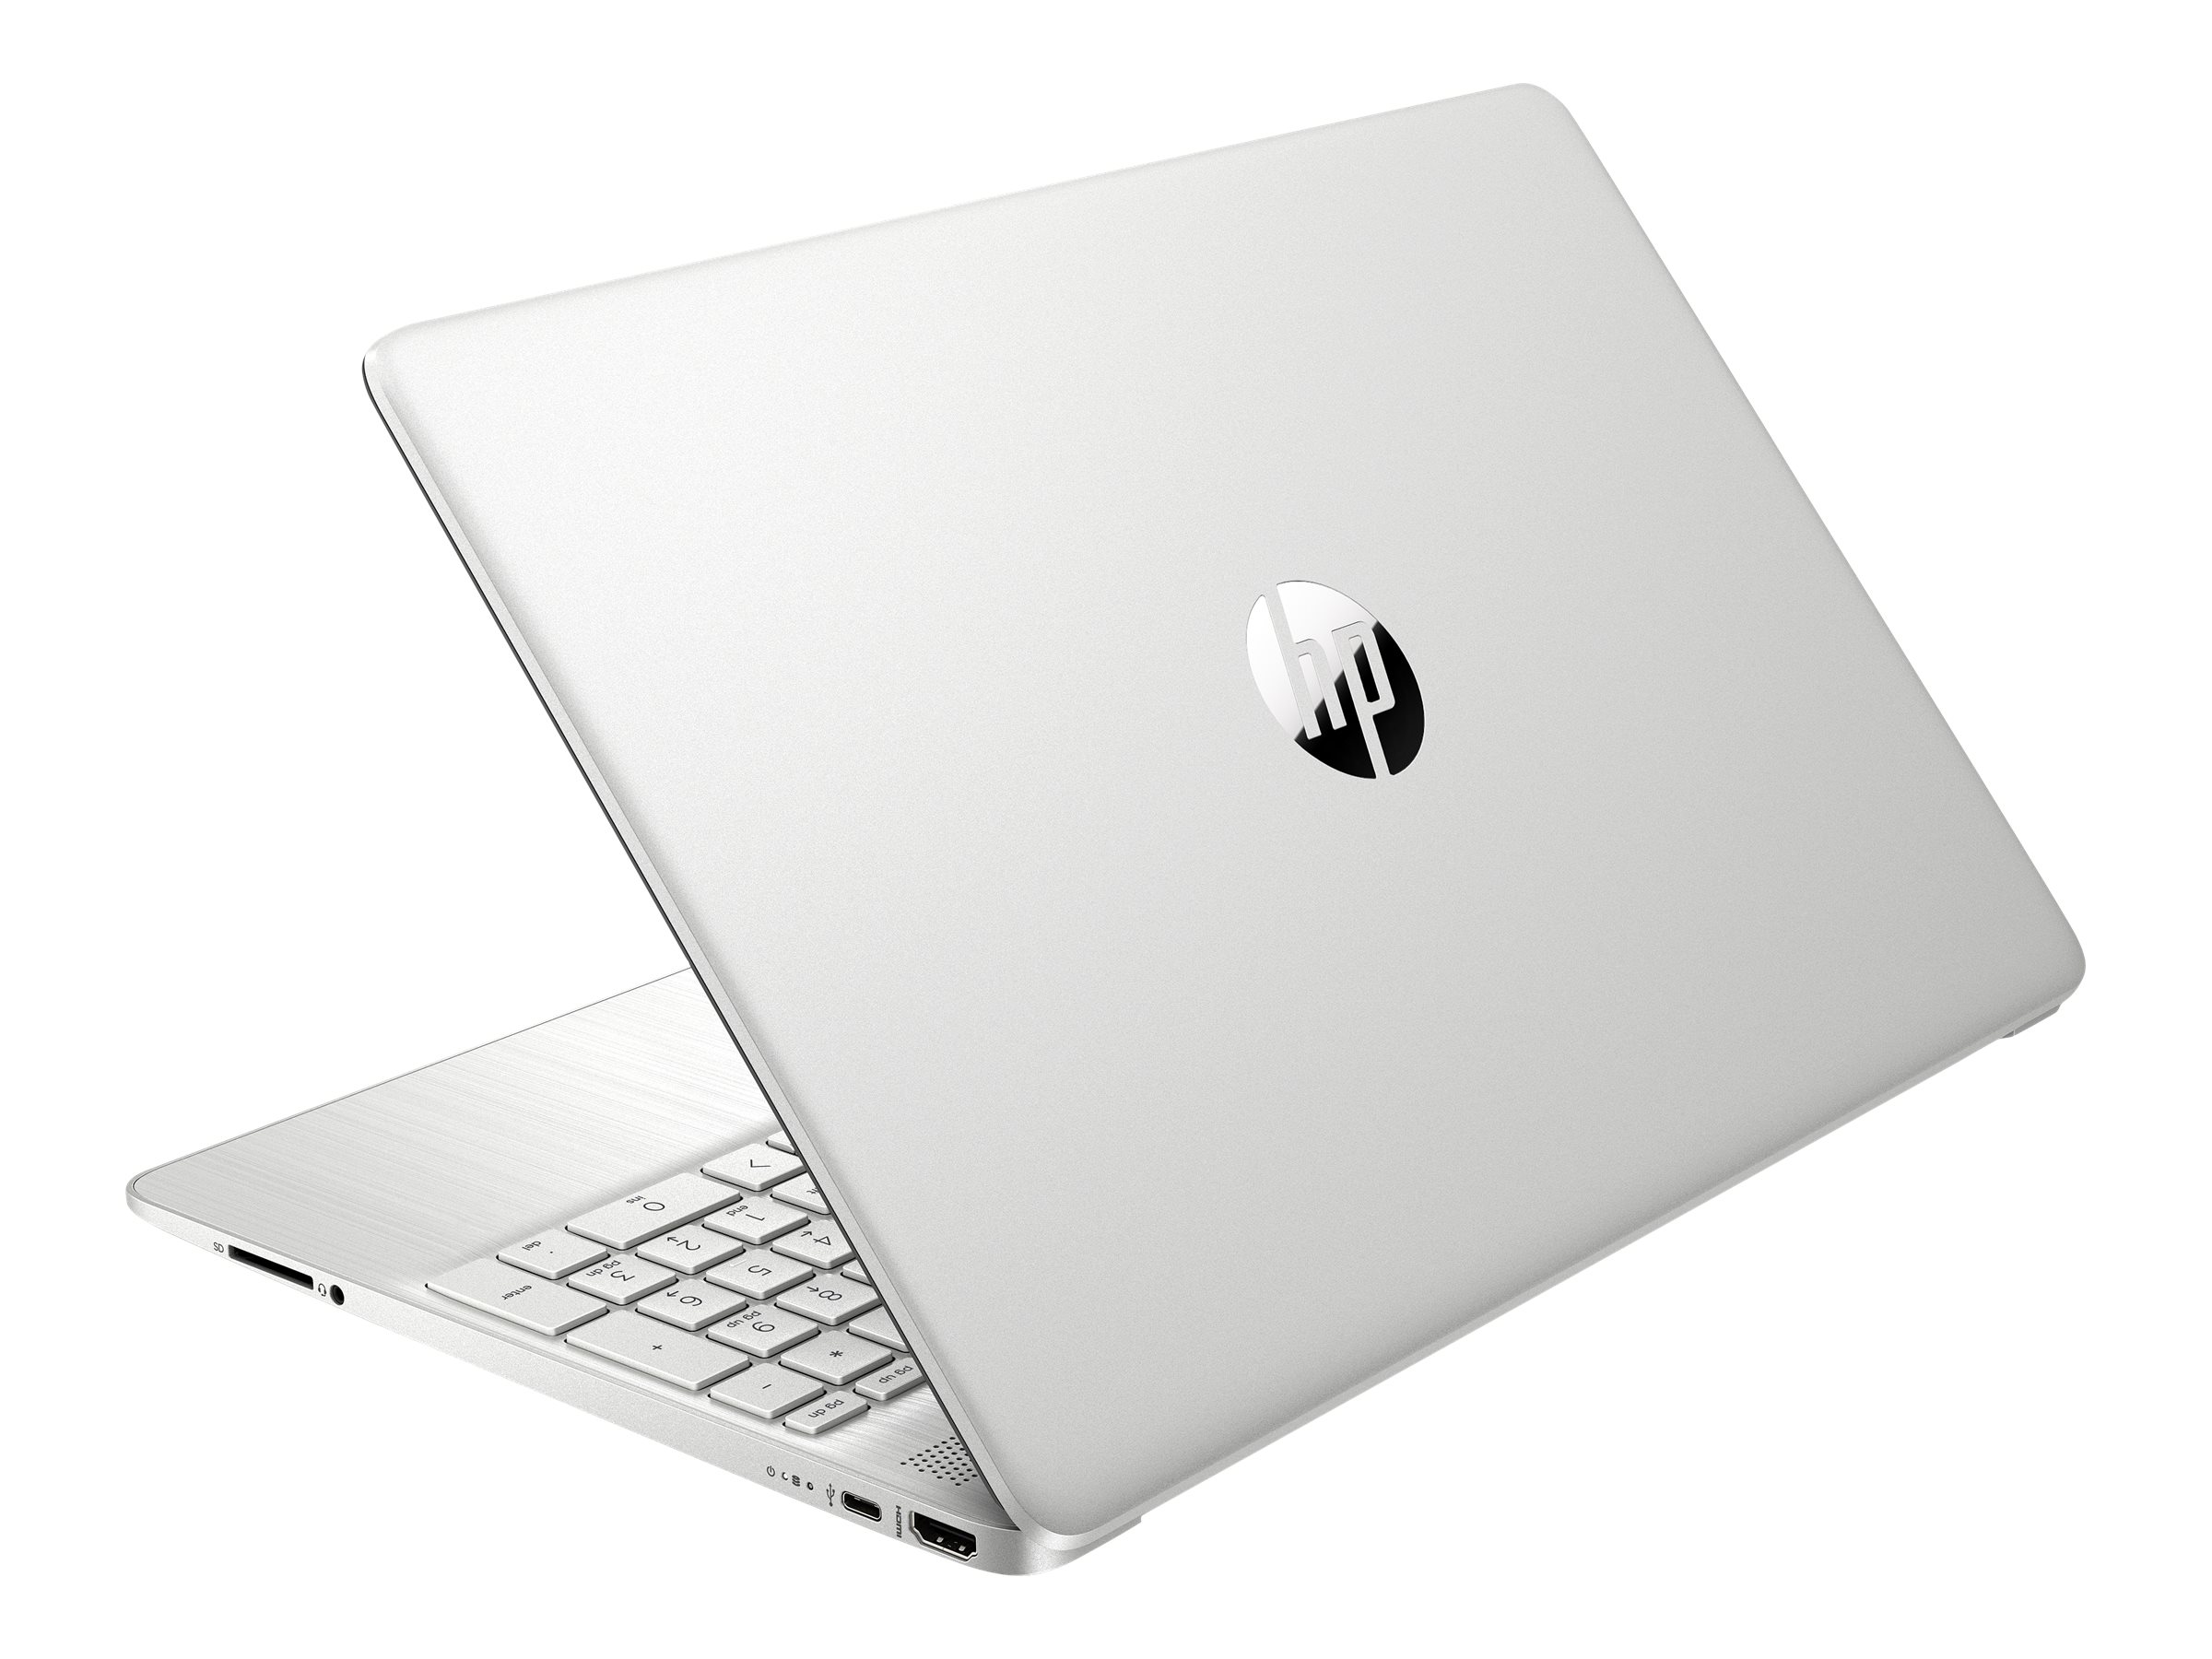 HP Laptop 15-dy1032ms - Intel Core i3 Win 10 Home in S mode - UHD Graphics - 8 GB RAM - 128 GB - image 4 of 6